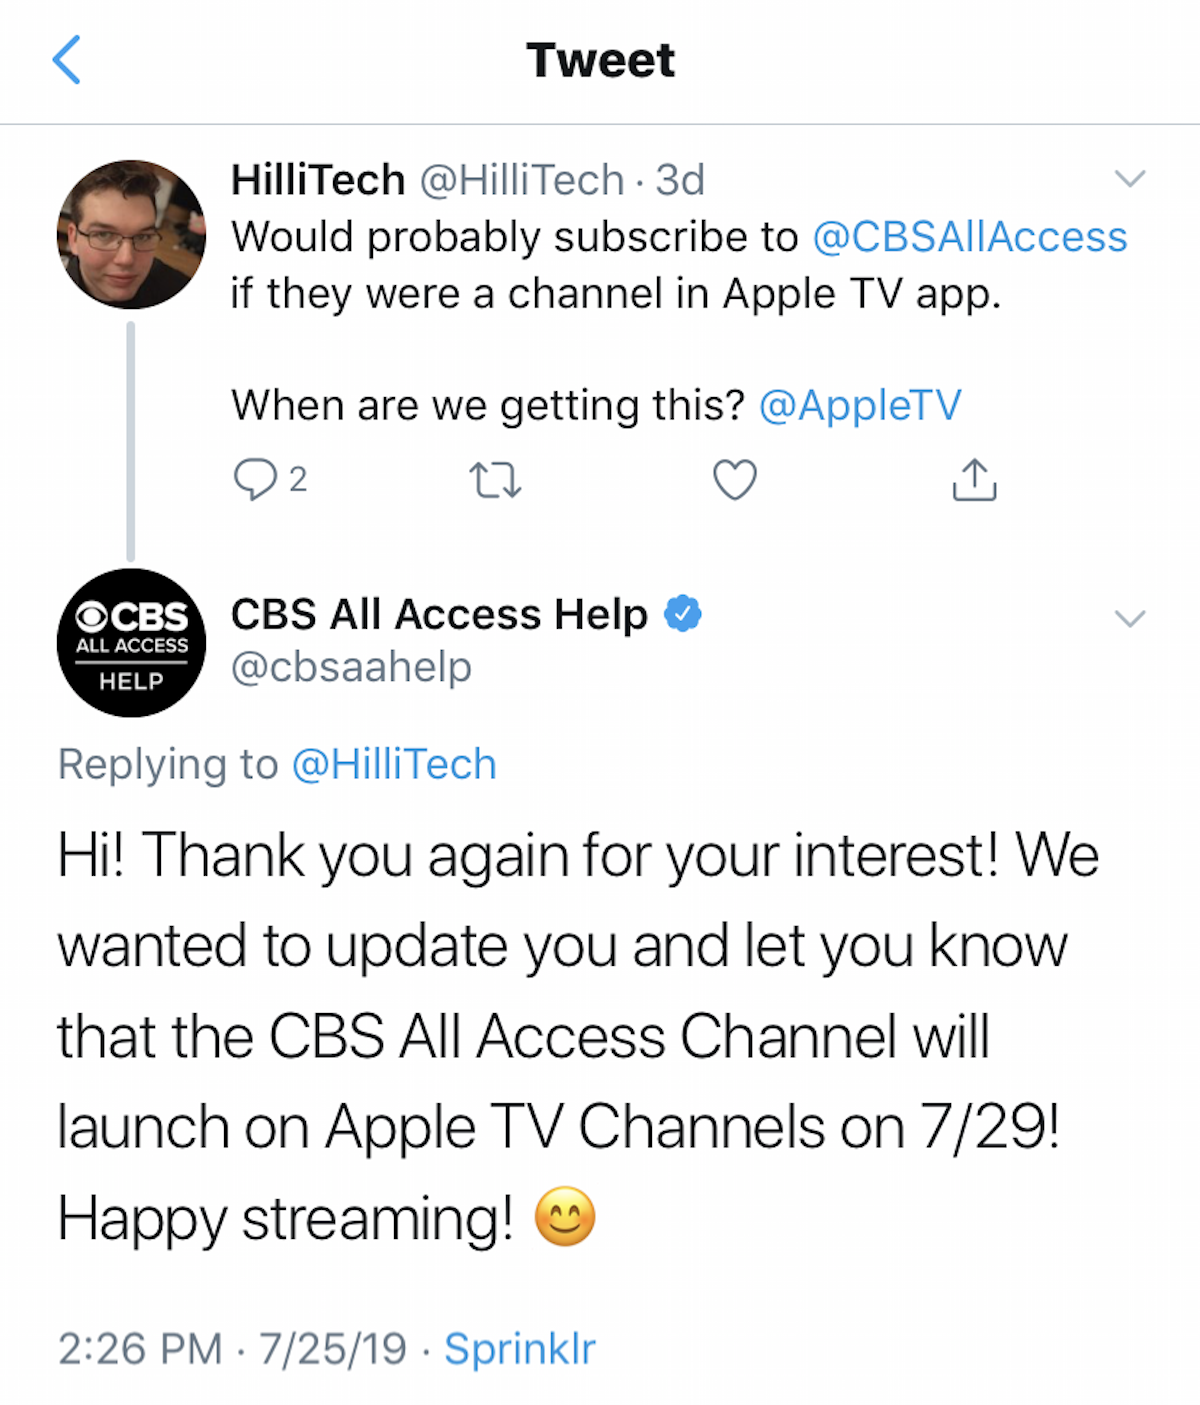 CBS All Access Coming Apple Channels on July 29th — Daily Star Trek News